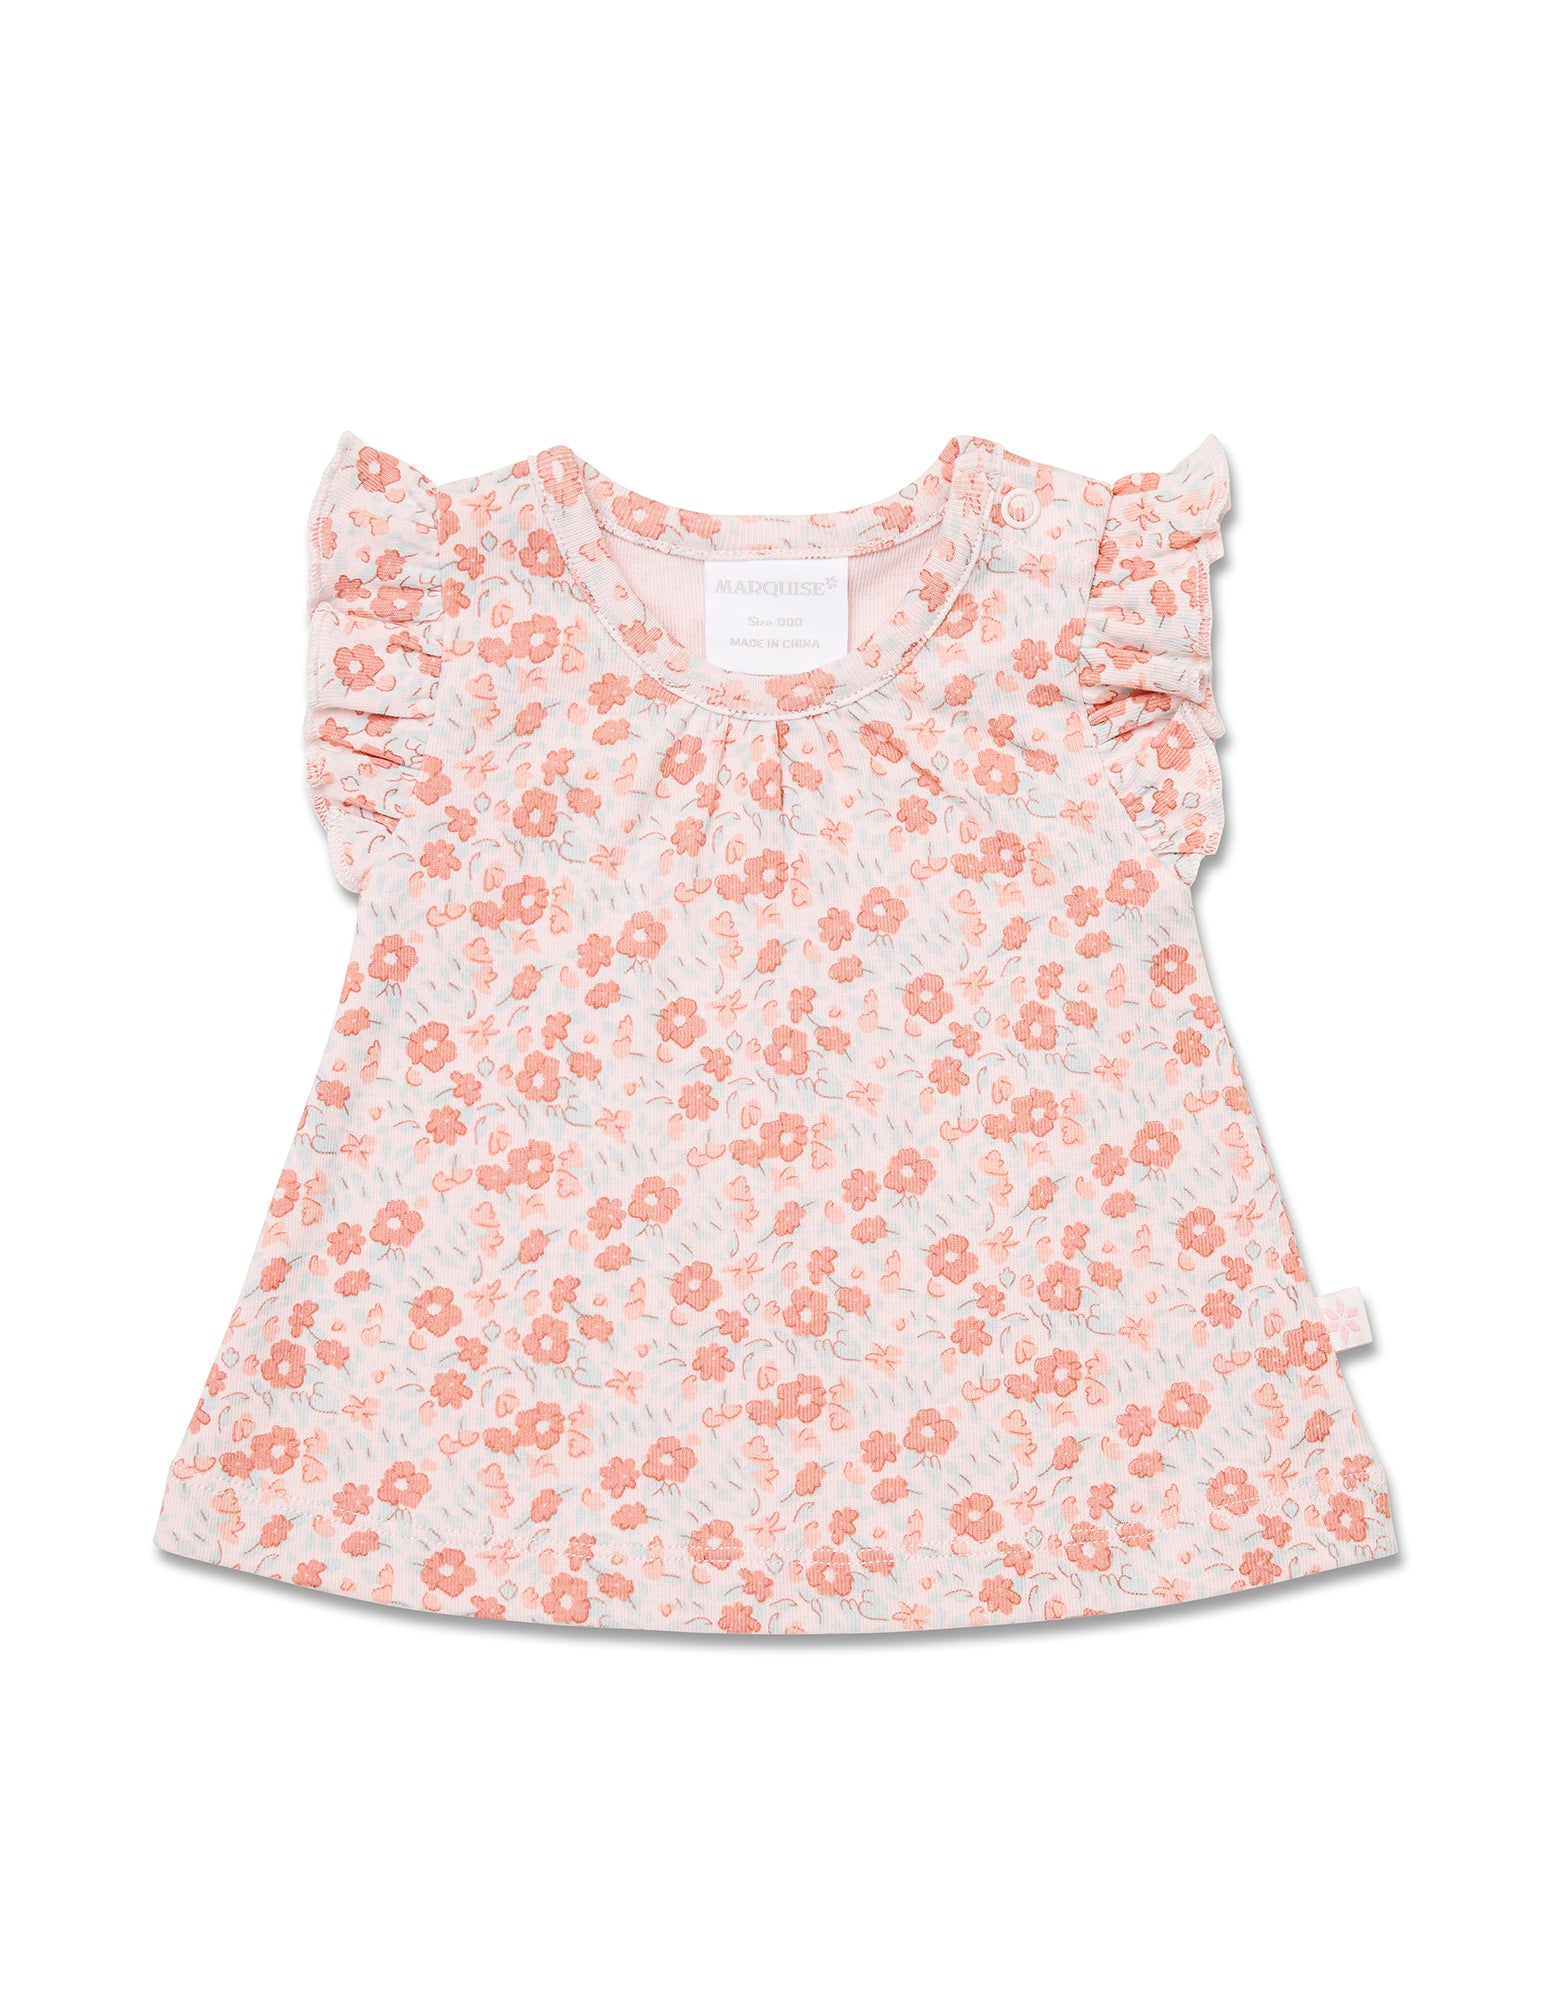 Marquise Frill Top & Nappy Cover - Floral/Blue